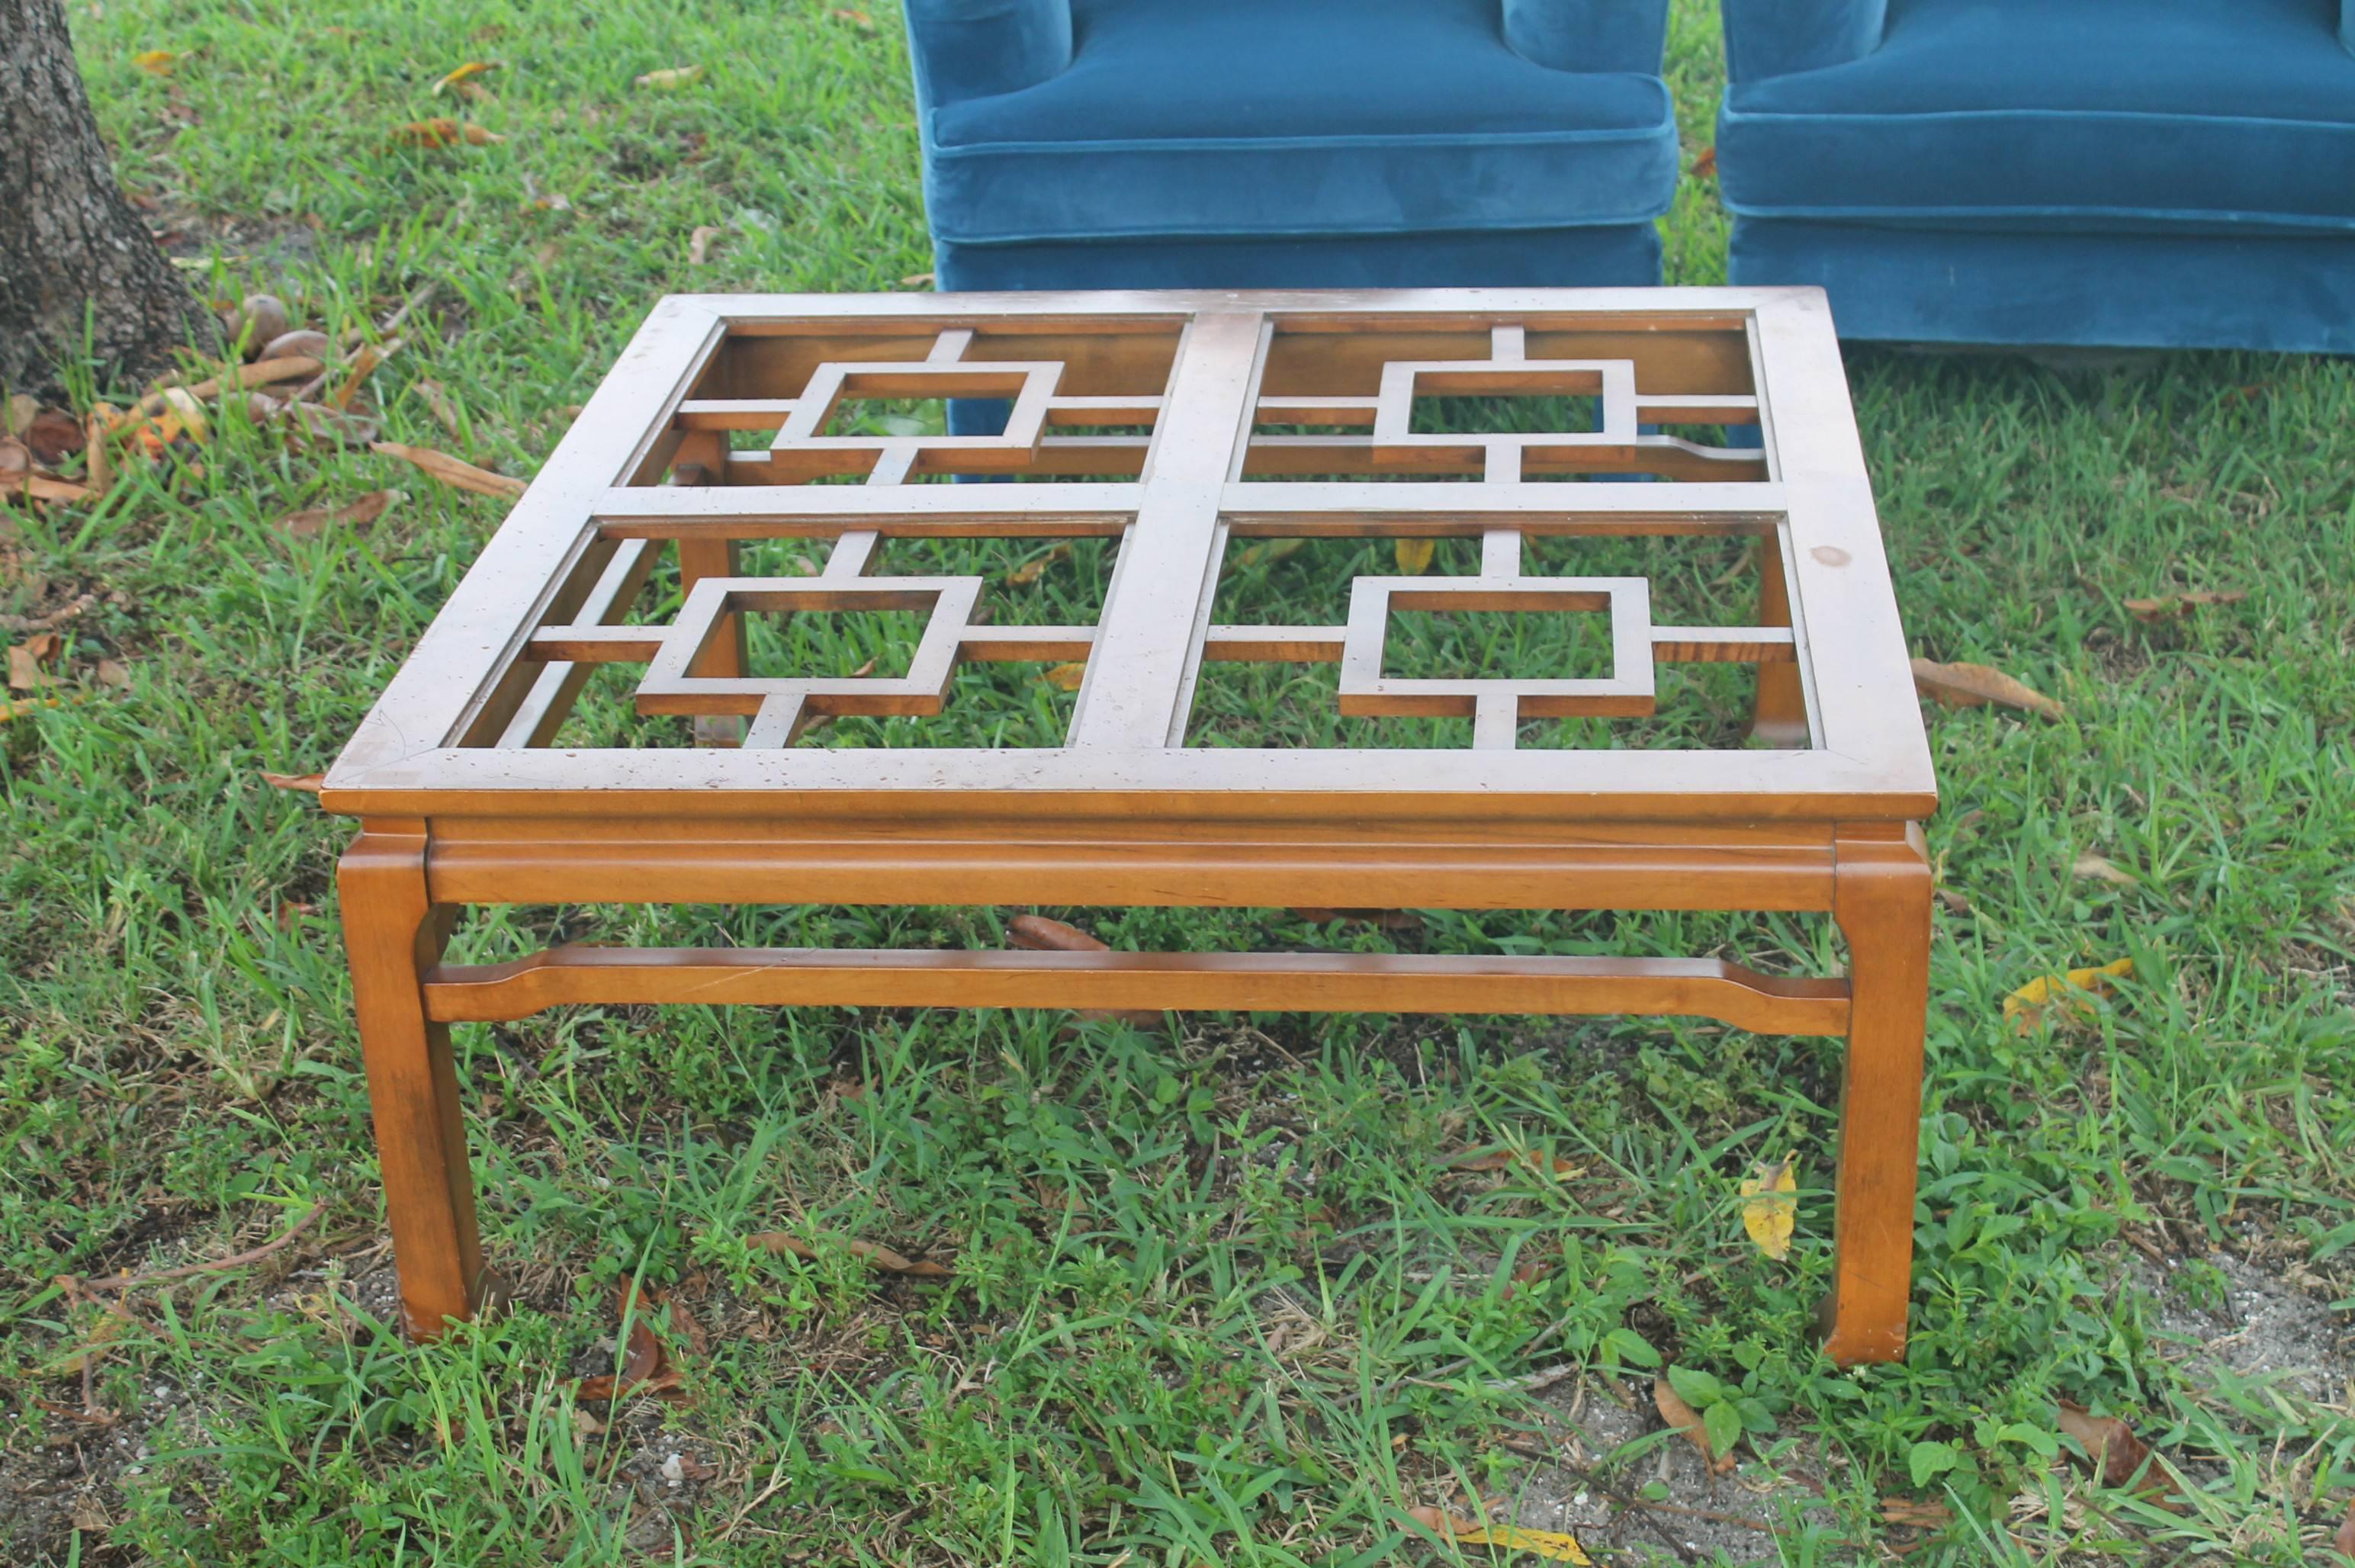 Vintage Hollywood Palm Beach Regency Ming fretwork fret work Chinese Chippendale coffee cocktail table in natural wood with glass top. This price includes your choice of color of professional lacquer for this table. Matching end side tables are also